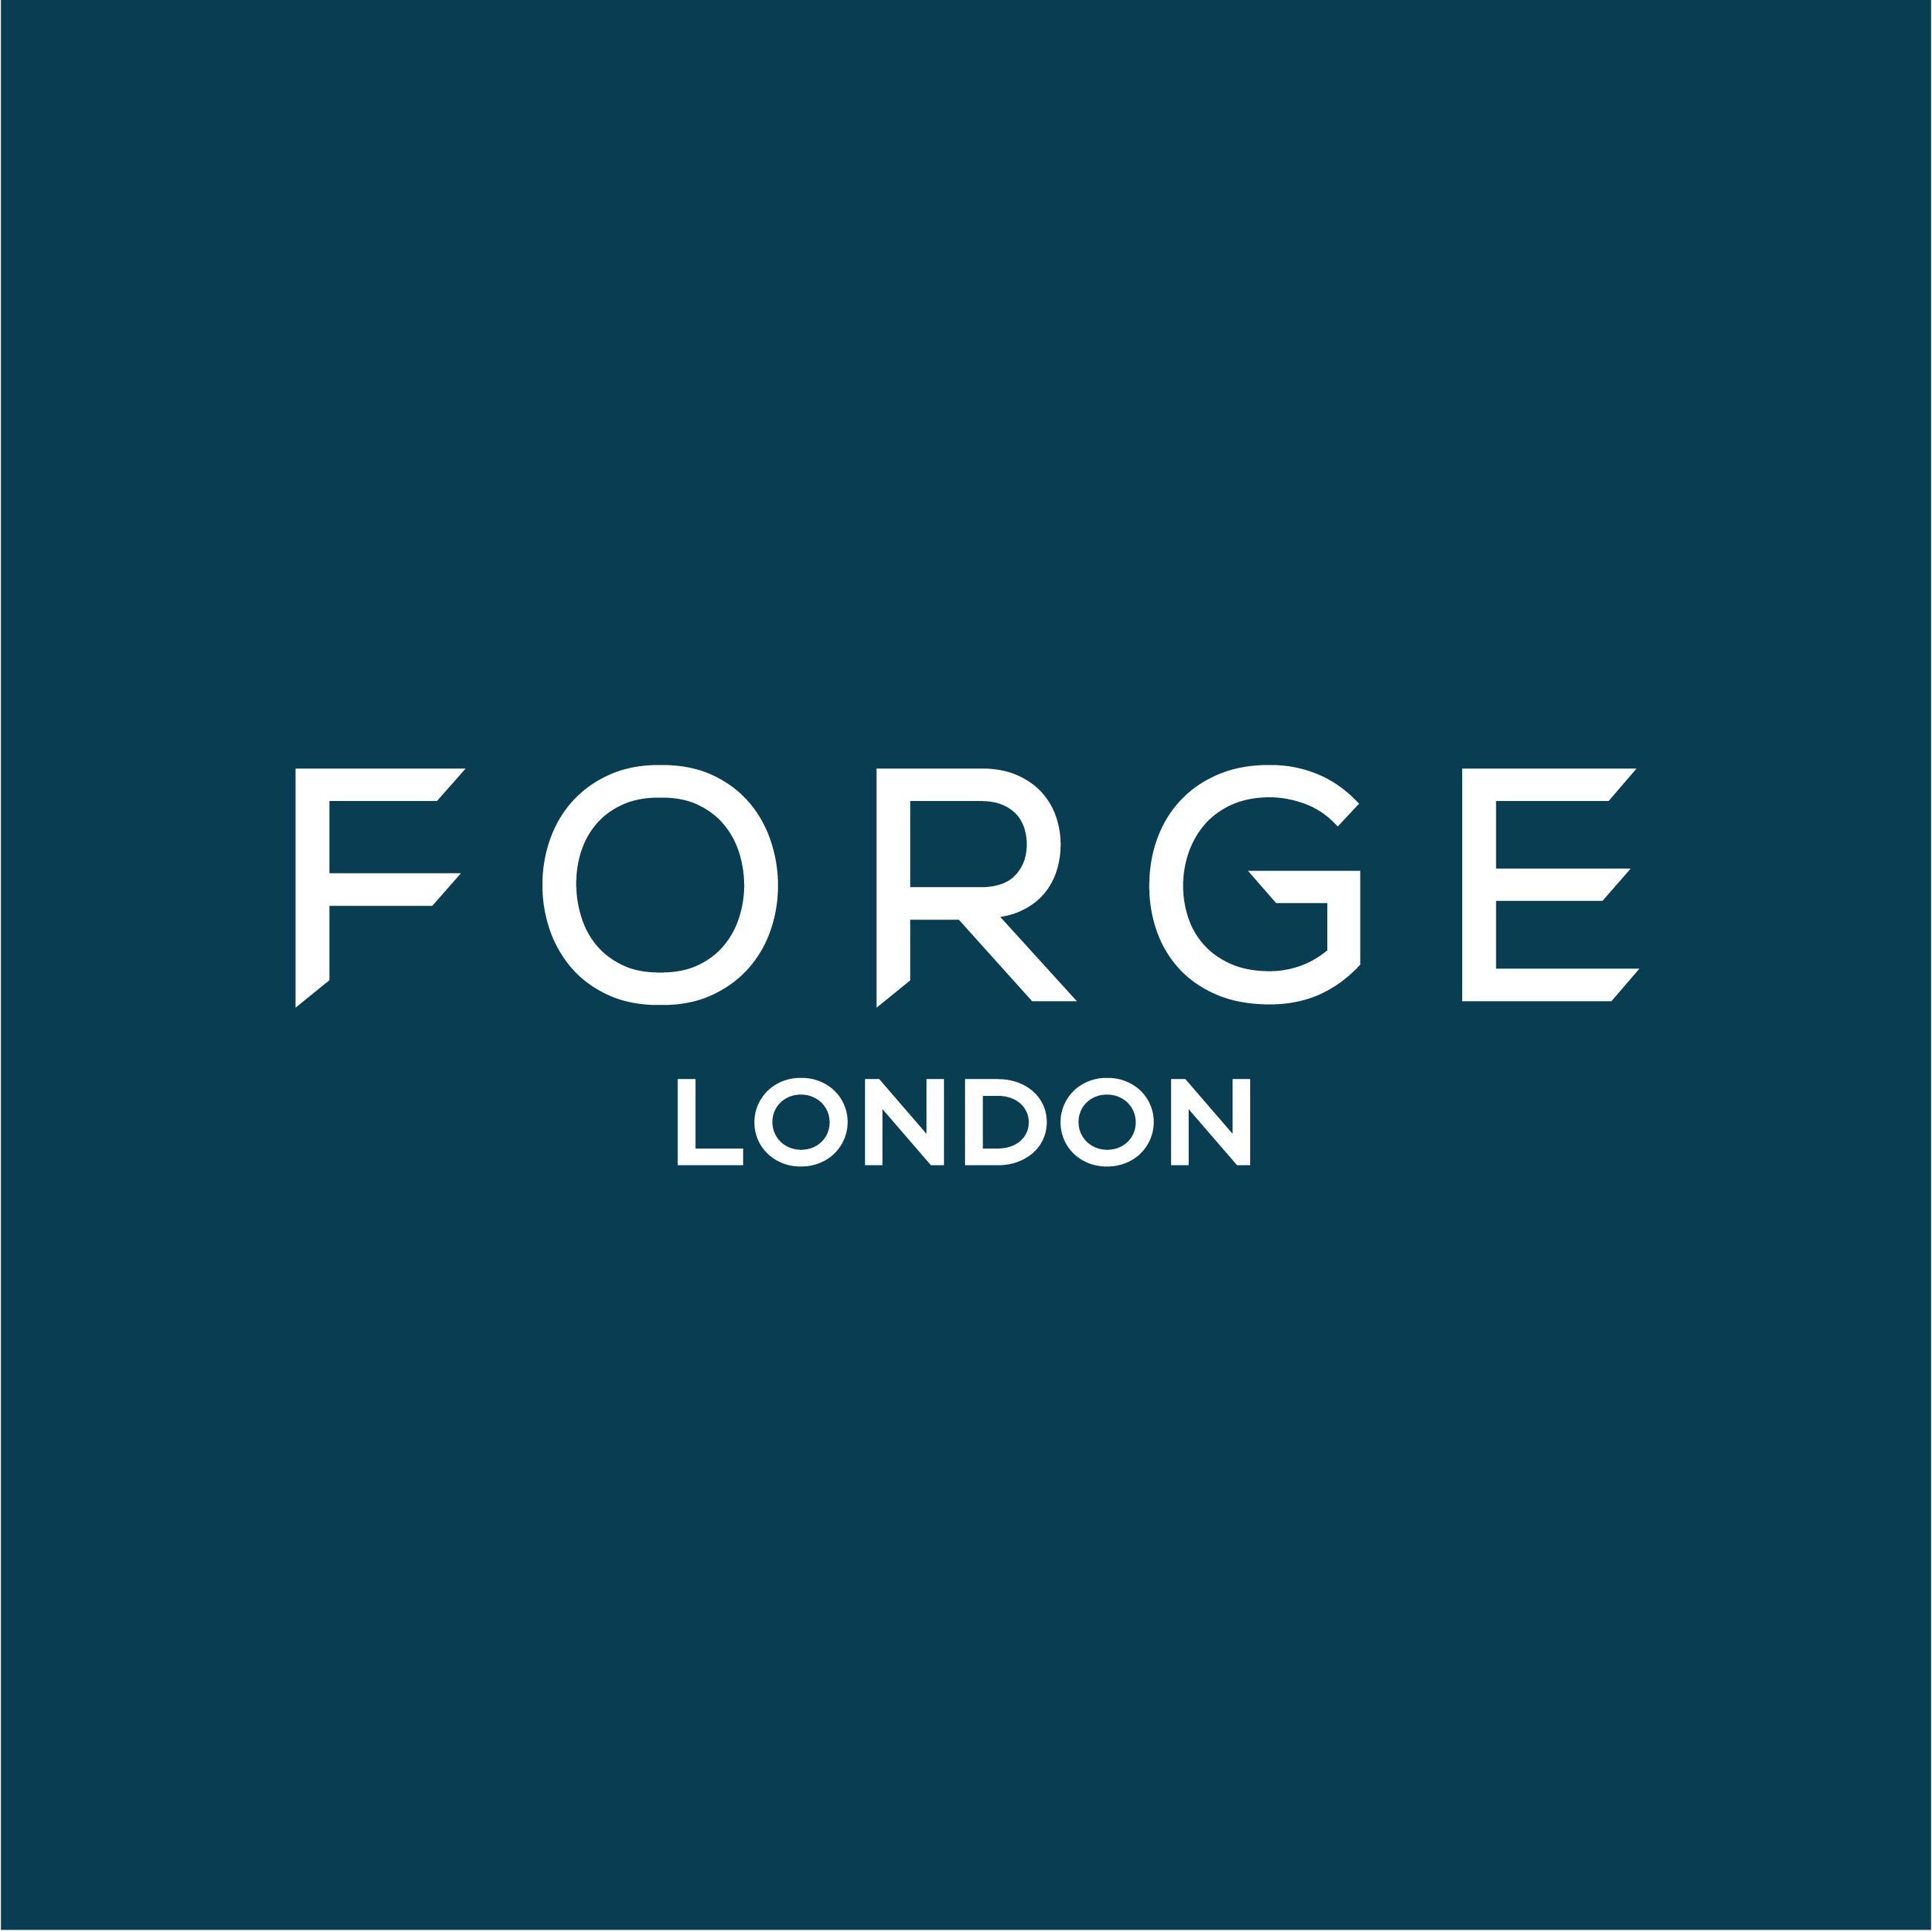 Club Image for FORGE LONDON